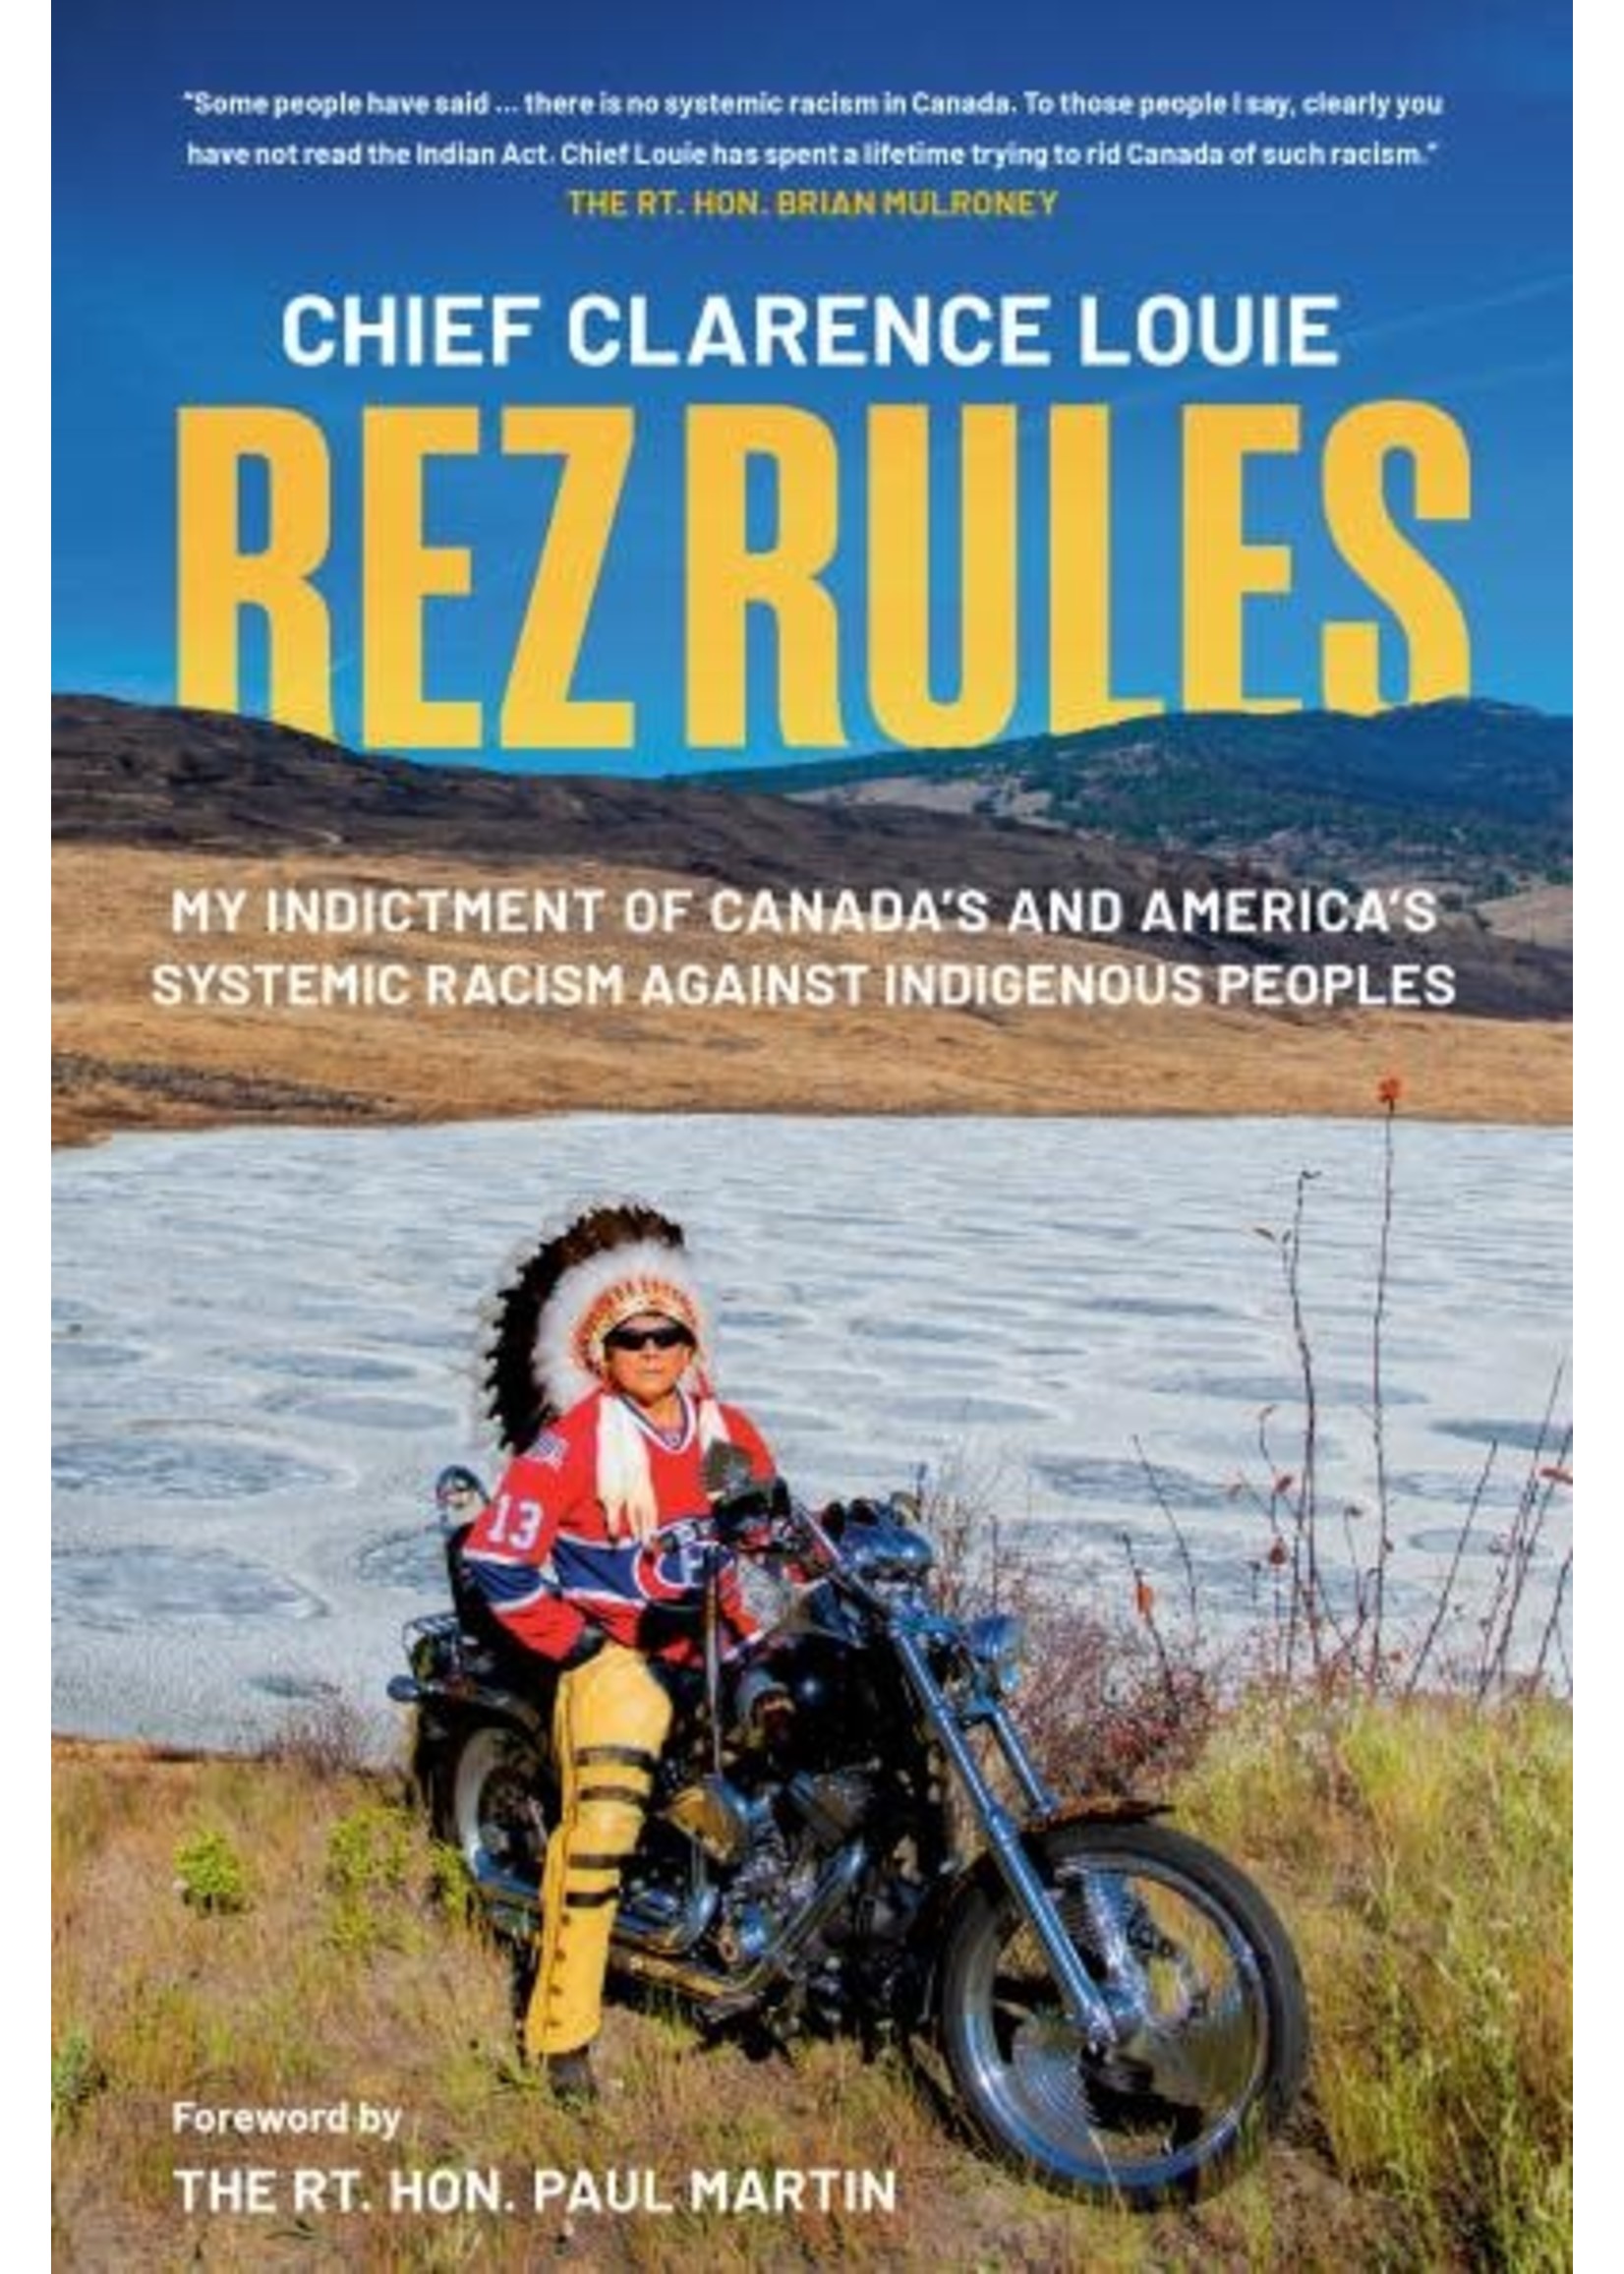 Rez Rules: My Indictment of Canada's and America's Systemic Racism Against Indigenous Peoples by Chief Clarence Louie